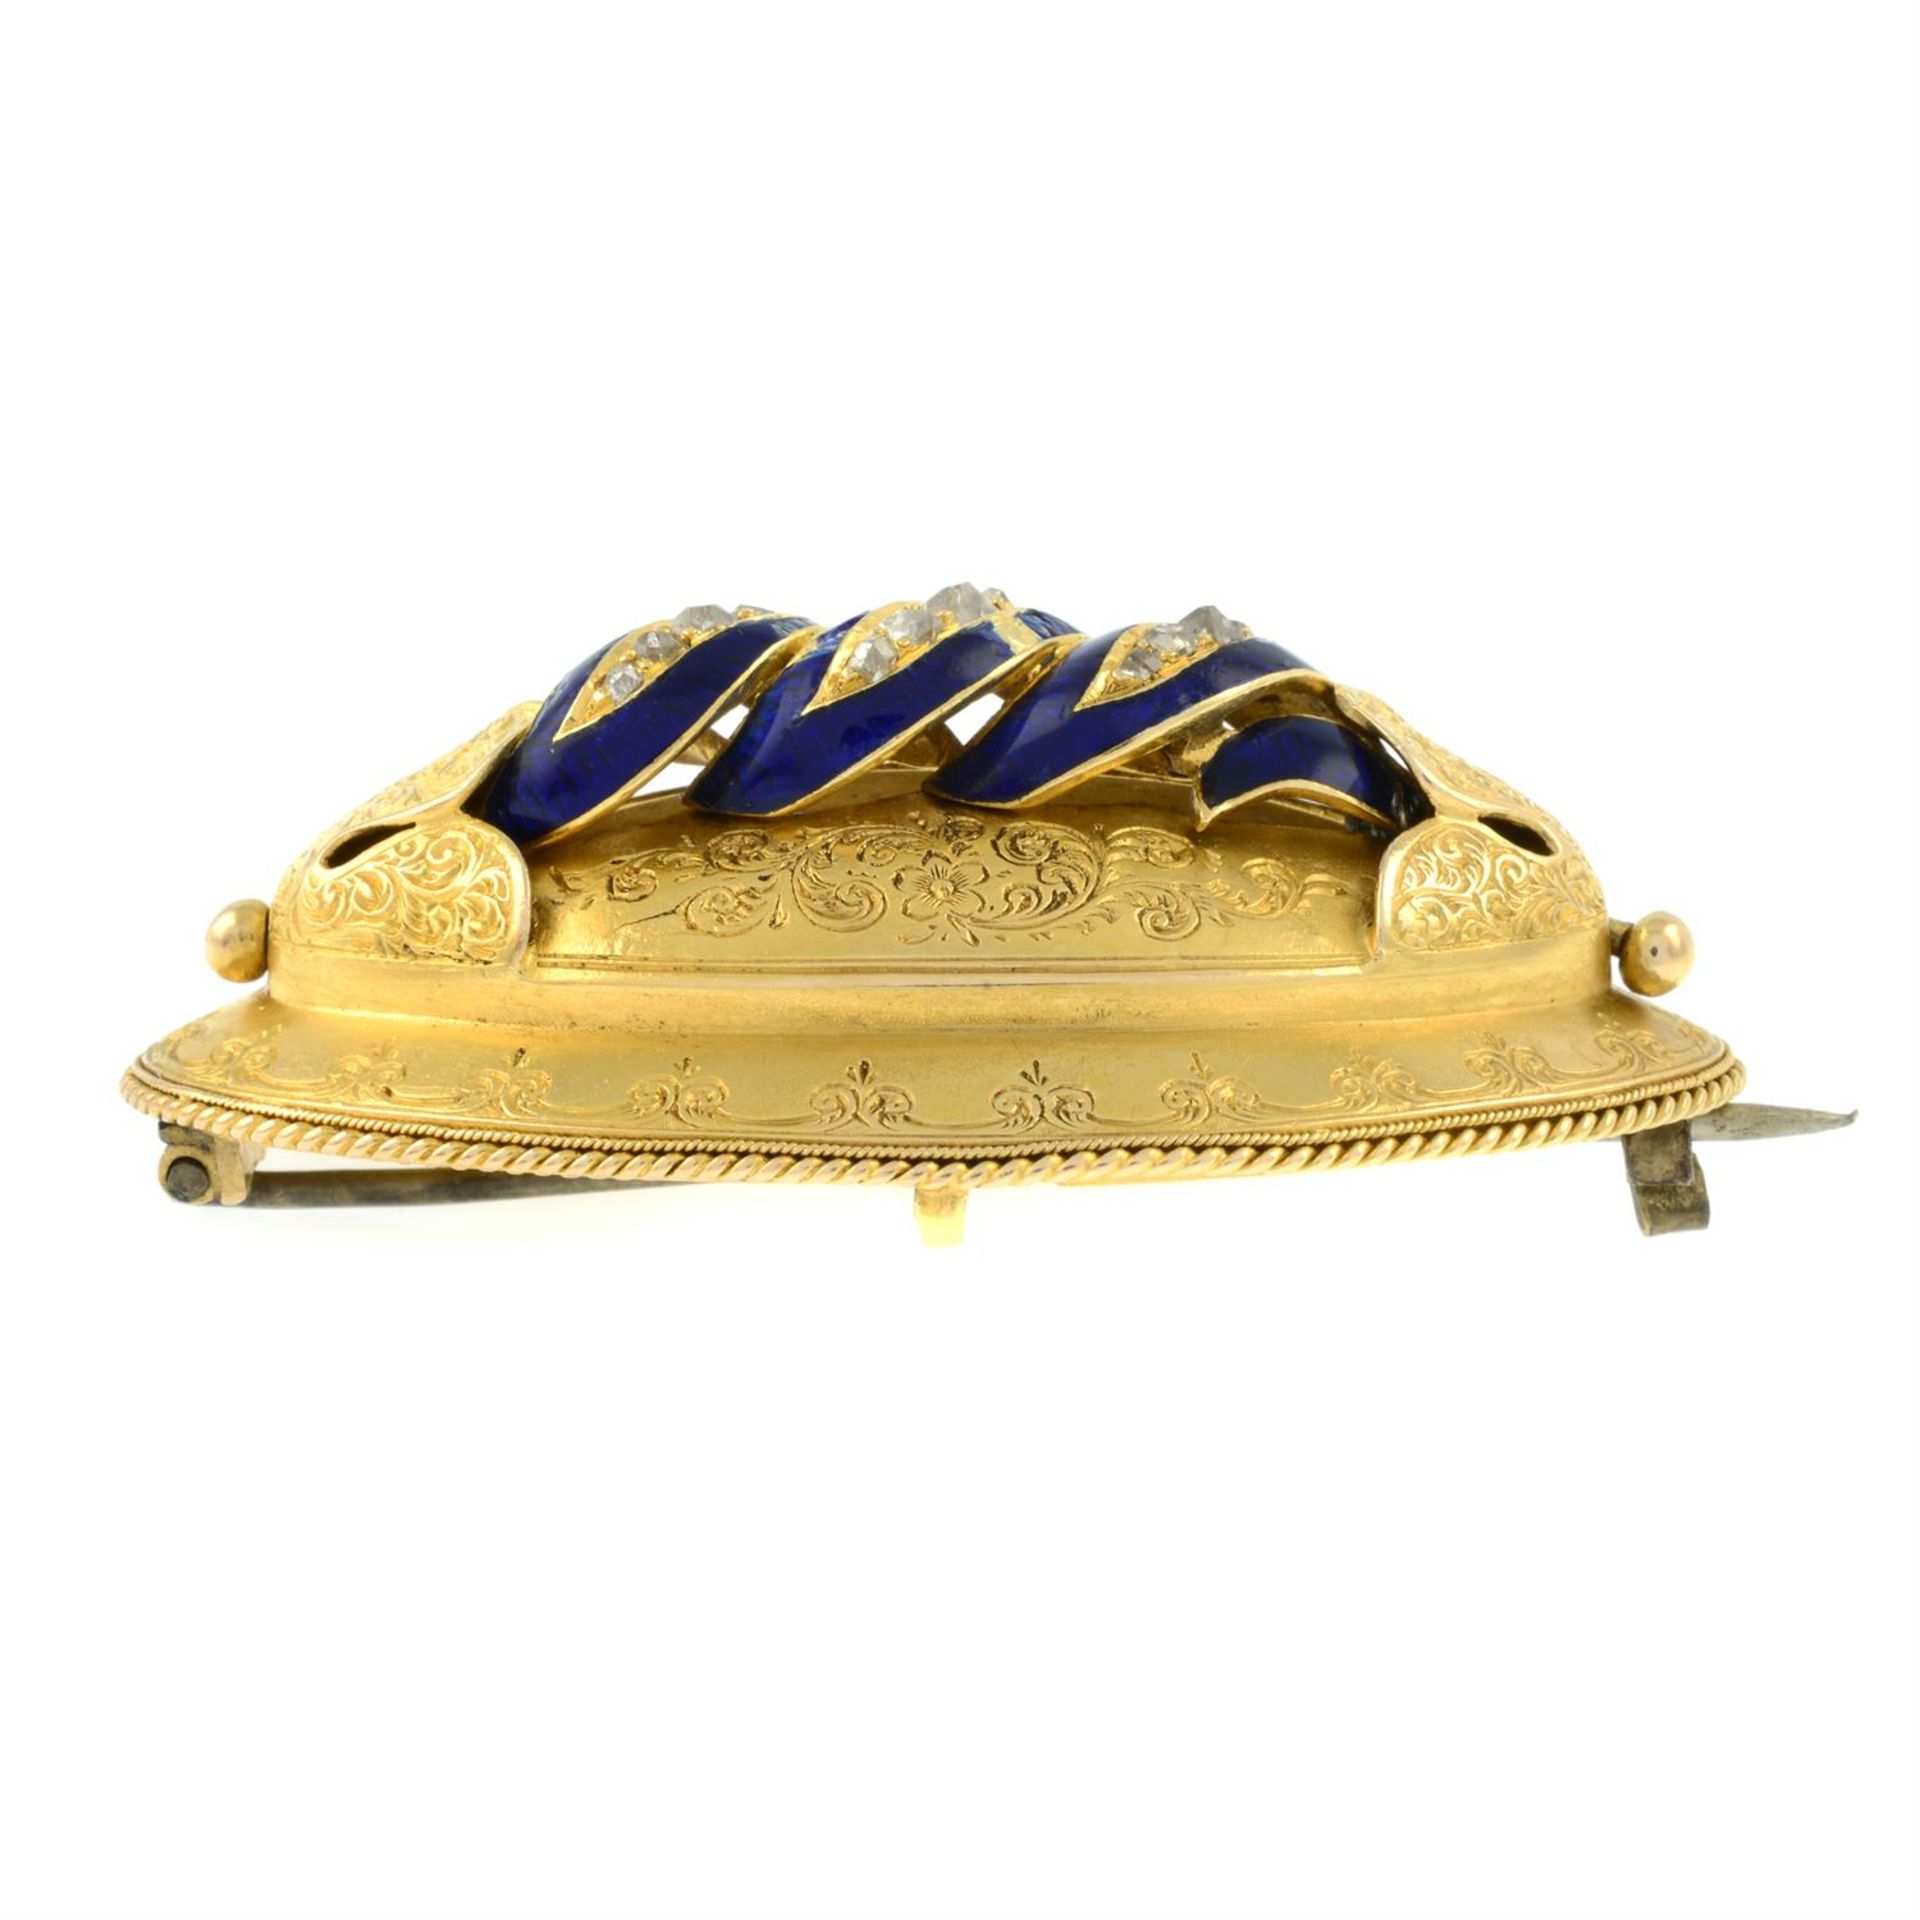 A mid to late 19th century engraved gold, old-cut diamond and blue enamel brooch. - Image 4 of 5